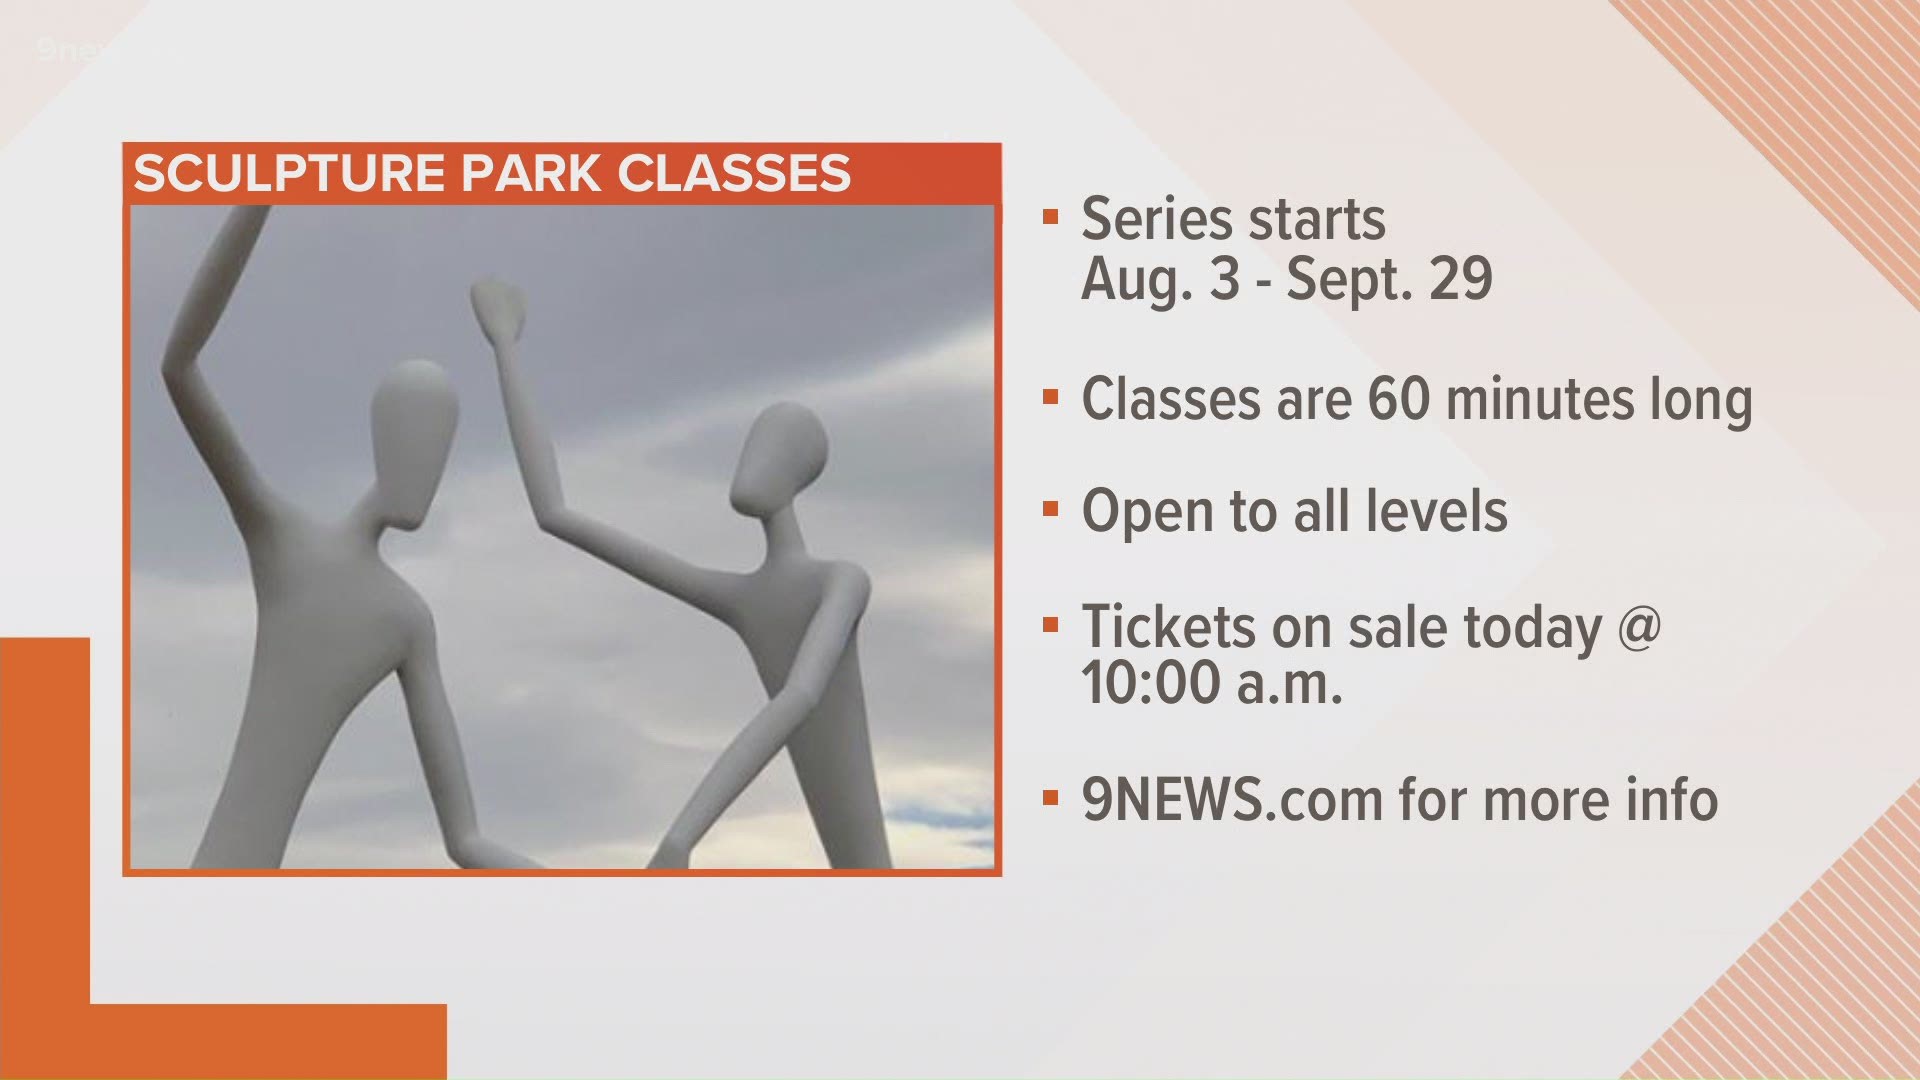 Denver Arts & Venues has a new partnership involving 10 local fitness studios who will put on fitness classes at Sculpture Park in downtown Denver.